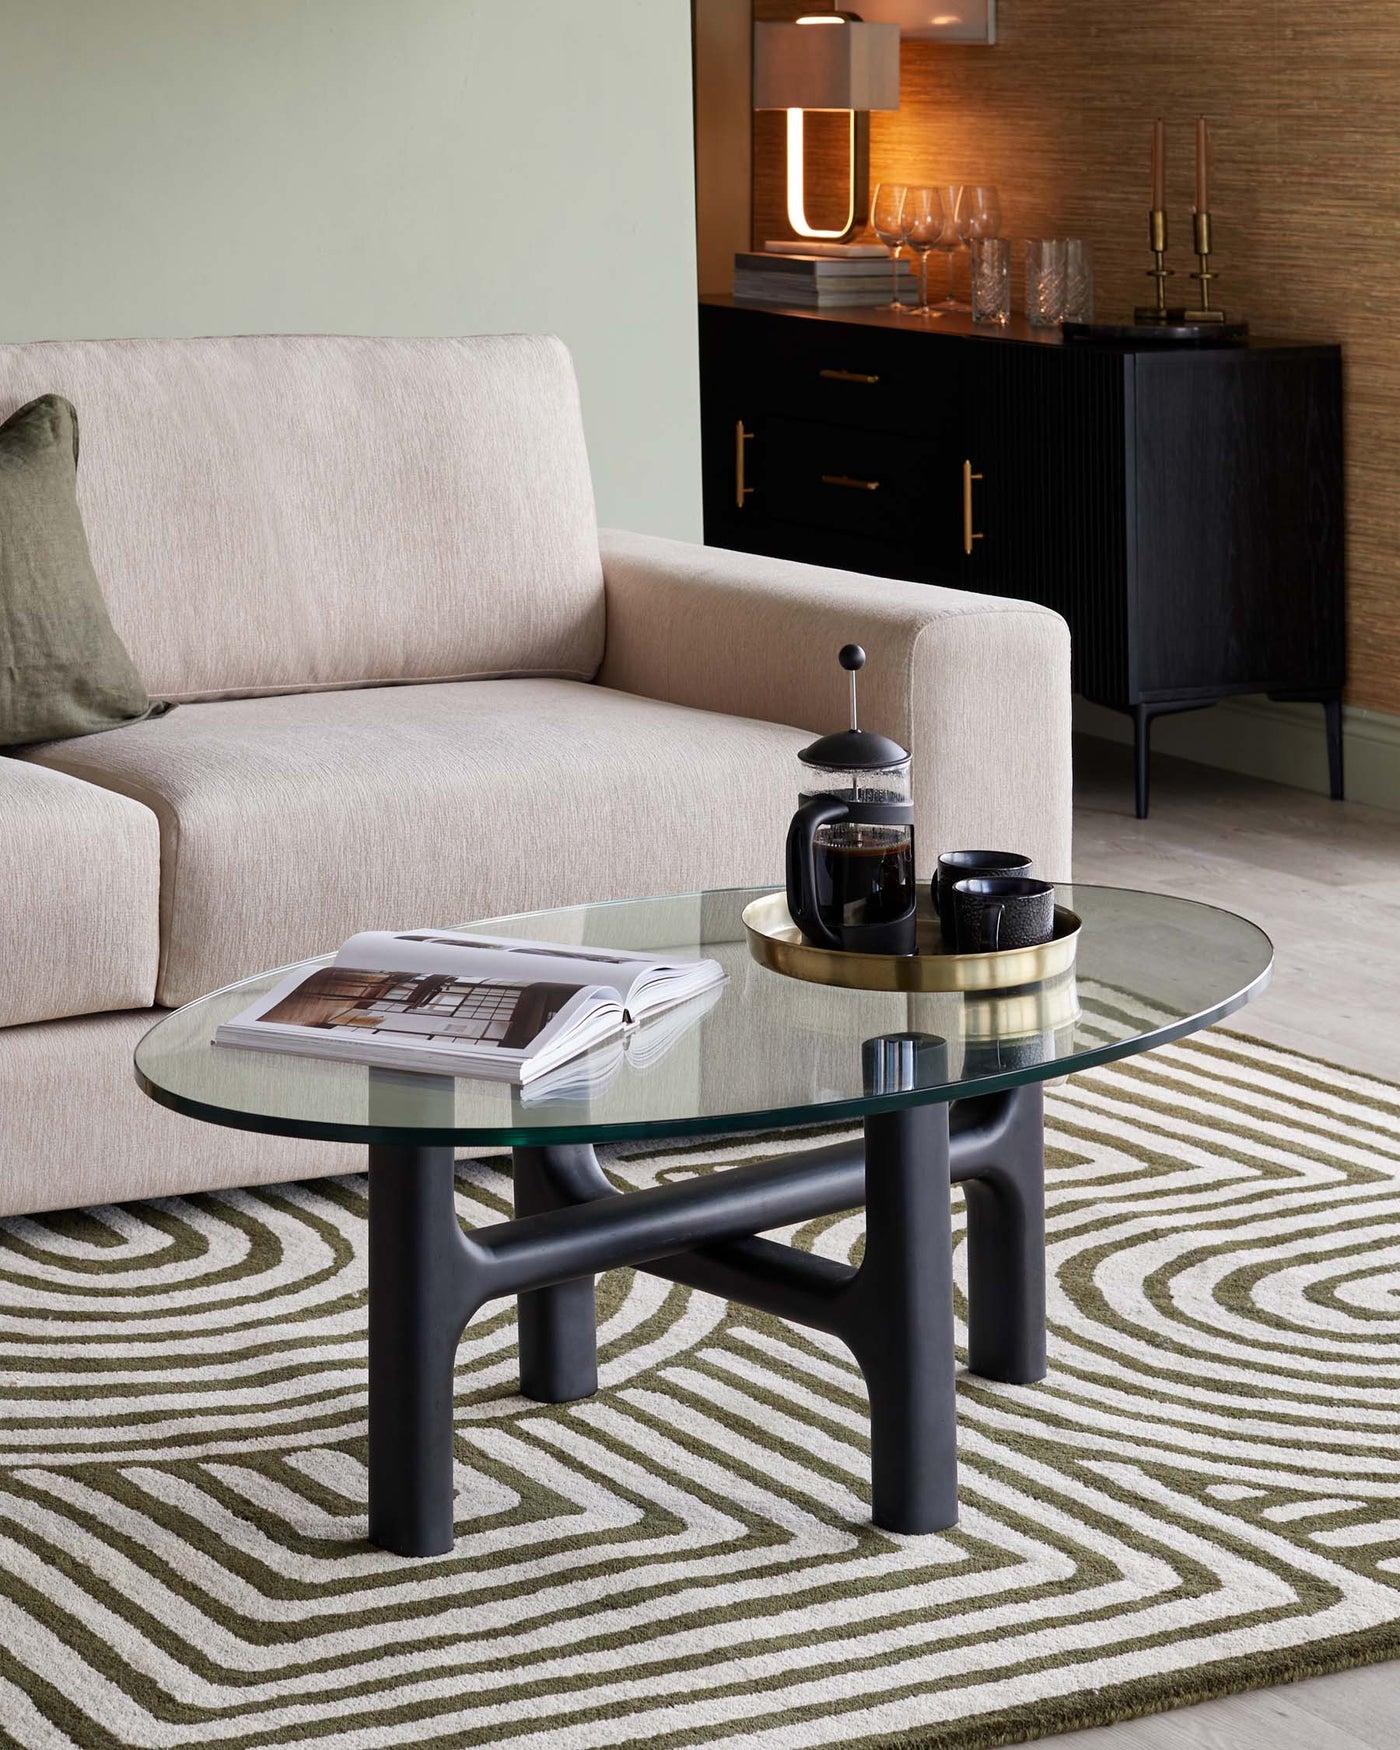 Contemporary furniture setup with a beige fabric upholstered sofa with clean lines and minimalistic design, paired with a round glass-top coffee table featuring a unique black base with asymmetrical leg placement. In the background, a sleek black sideboard cabinet with gold-tone handles and an inset marble top adds a touch of elegance.